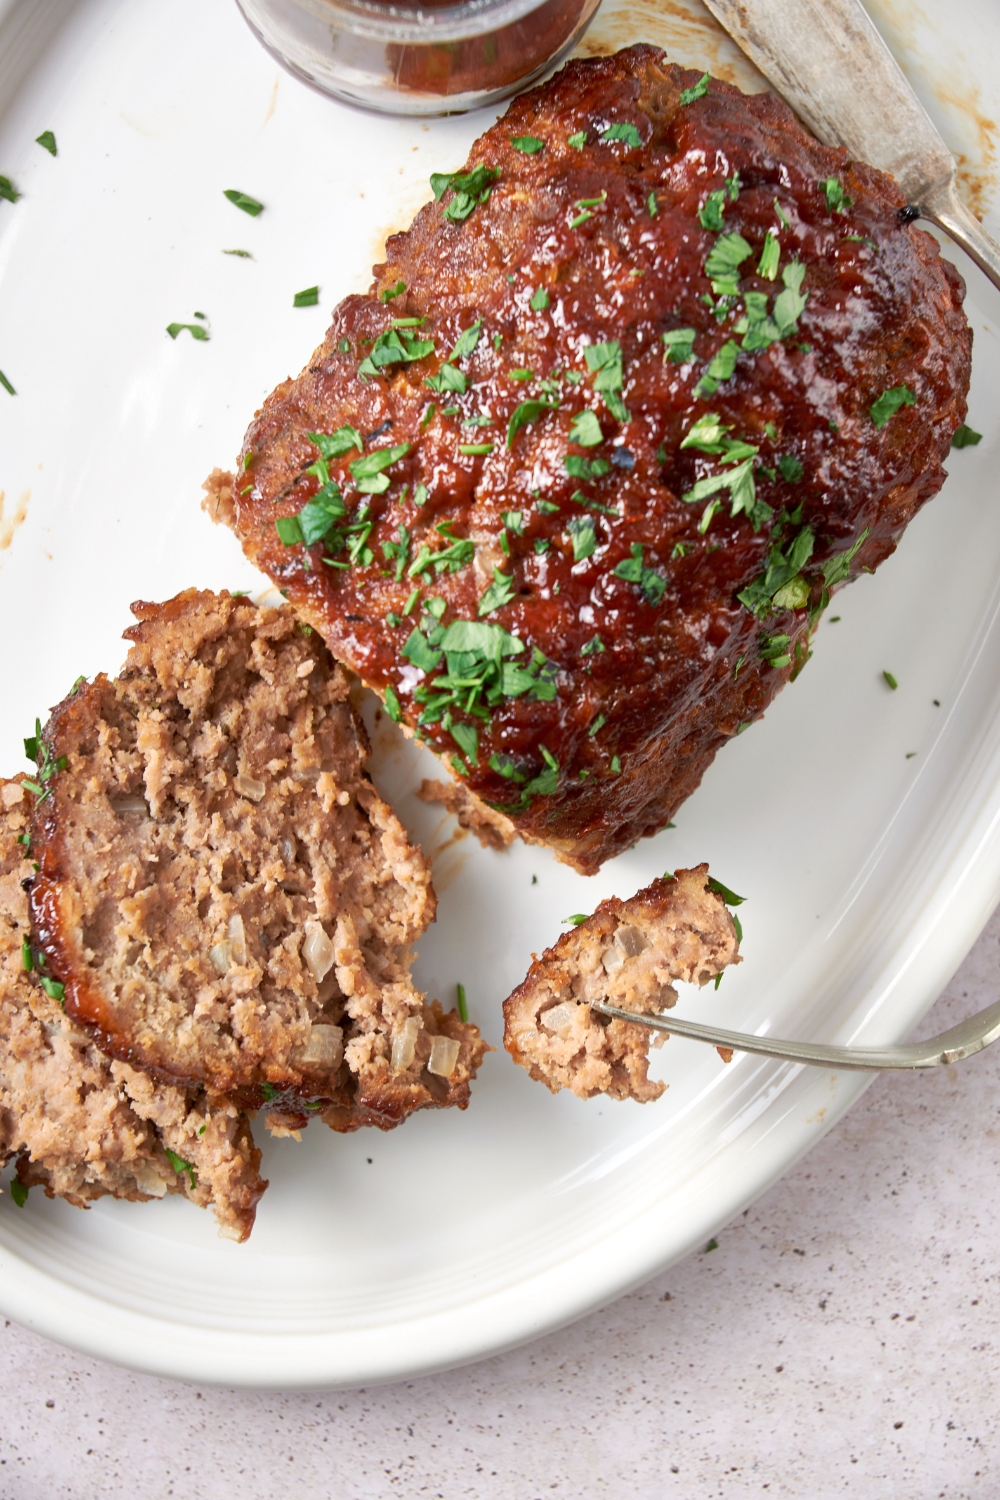 A sliced BBQ meatloaf garnished with parsley on a white serving tray. A fork picks up a piece of meatloaf.